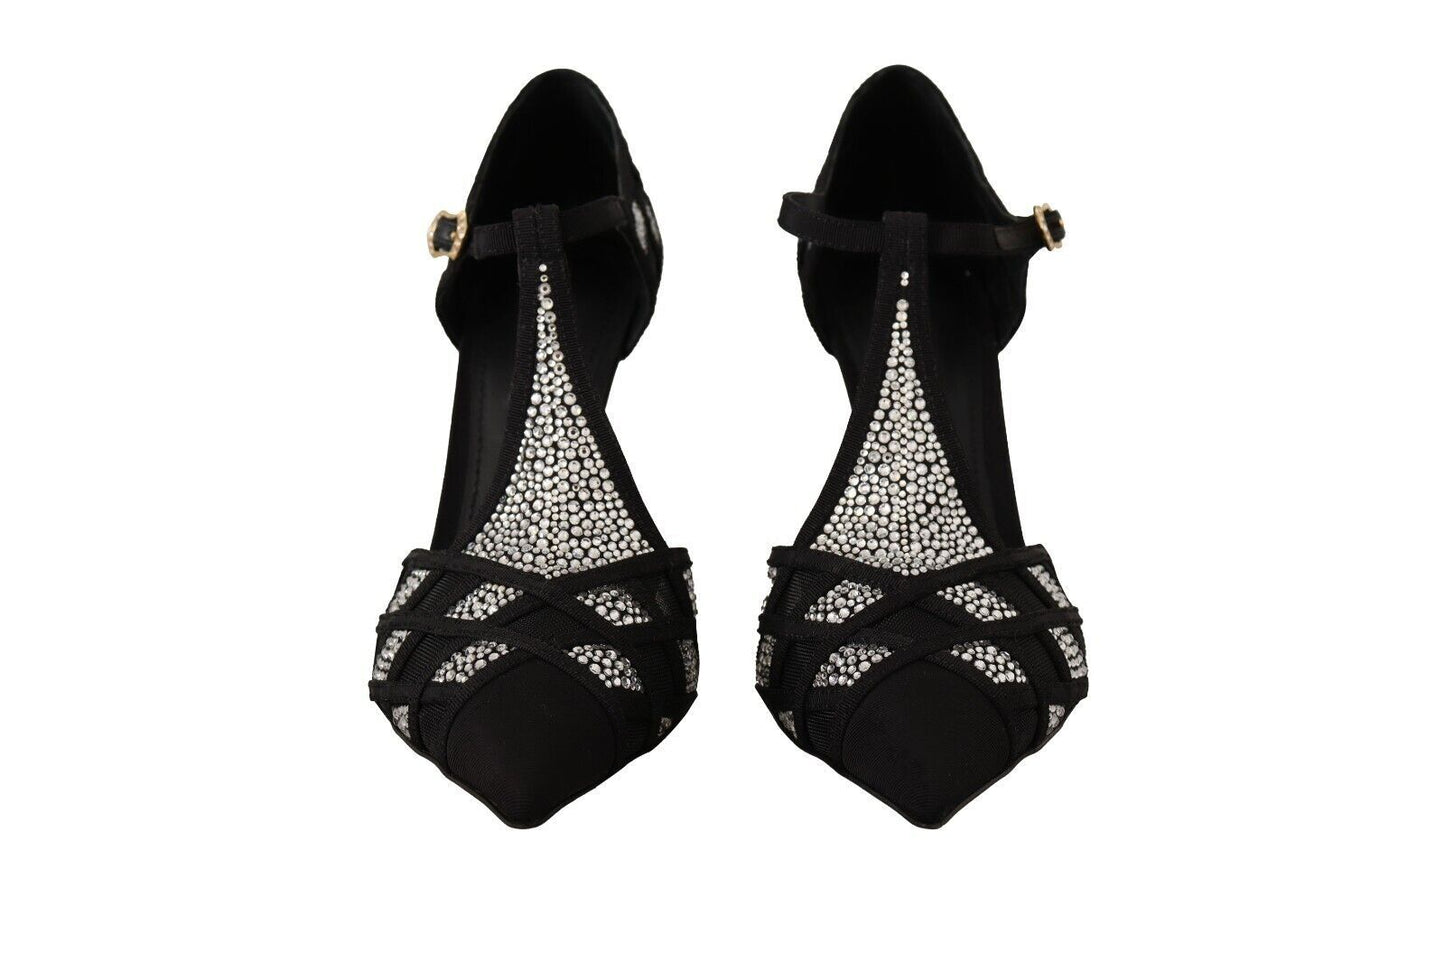 Dolce & Gabbana Black Crystals T-STrap talons pompes chaussures